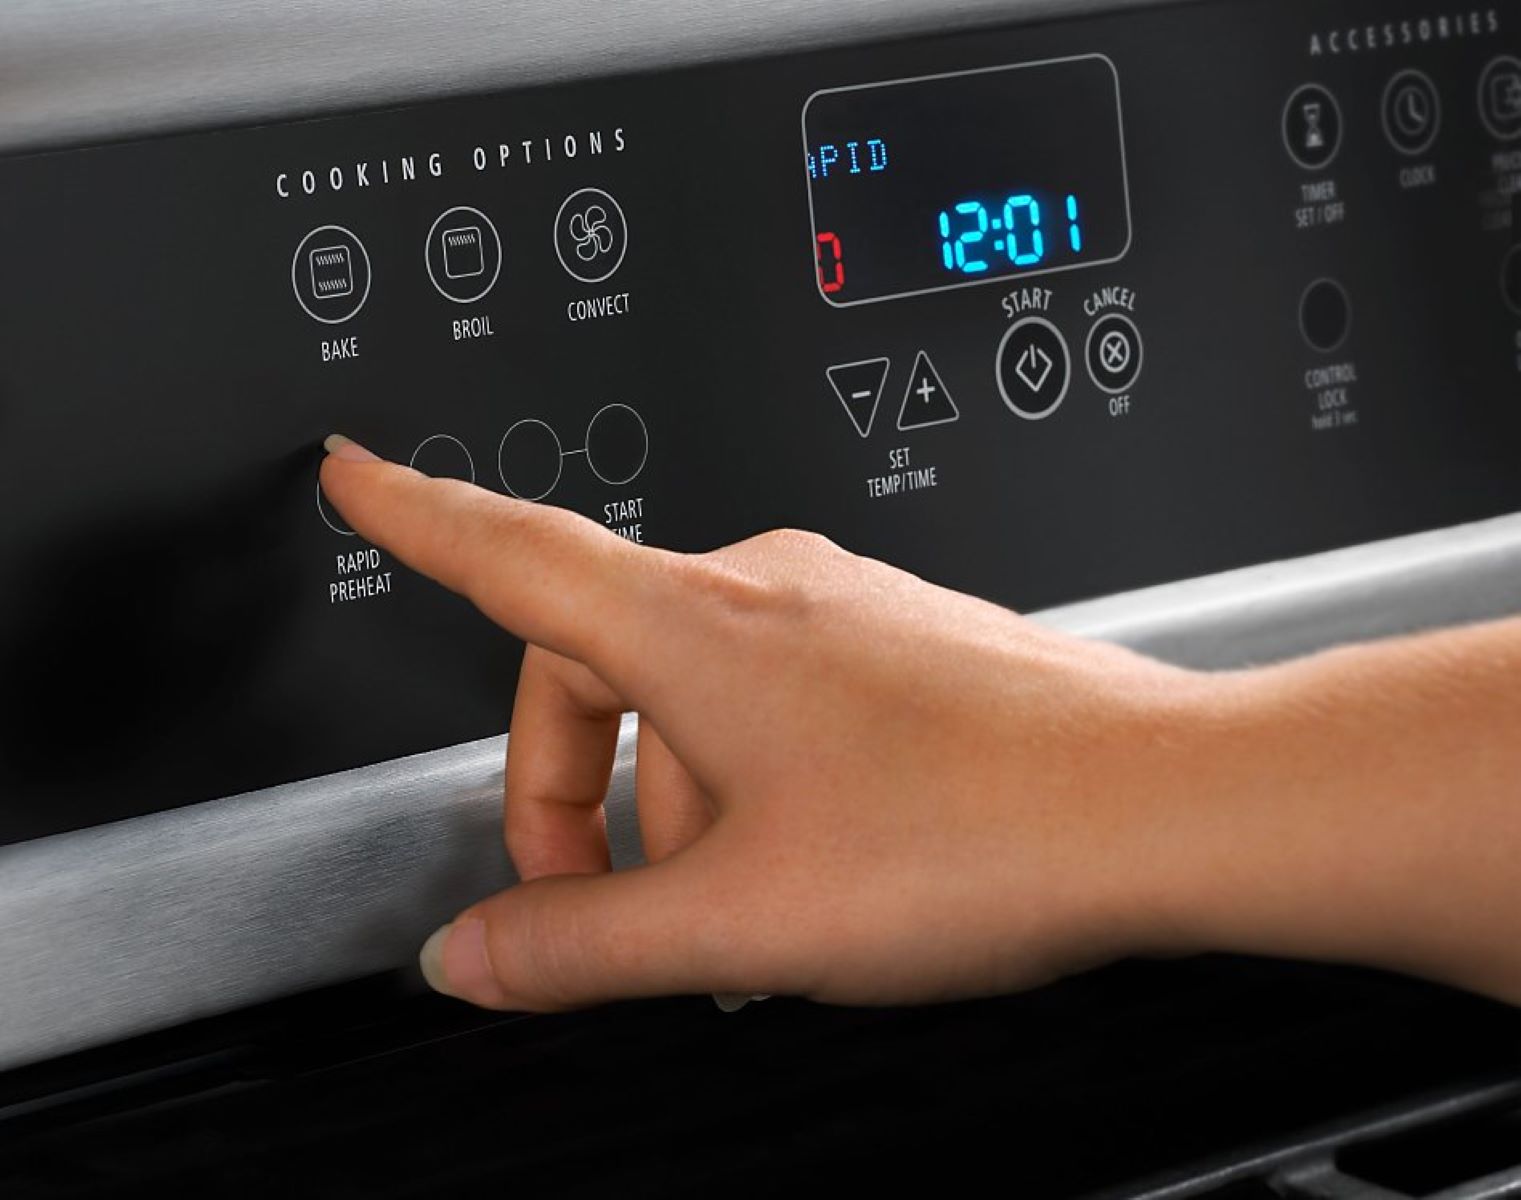 How To Fix The Error Code E4 For Whirlpool Oven & Range